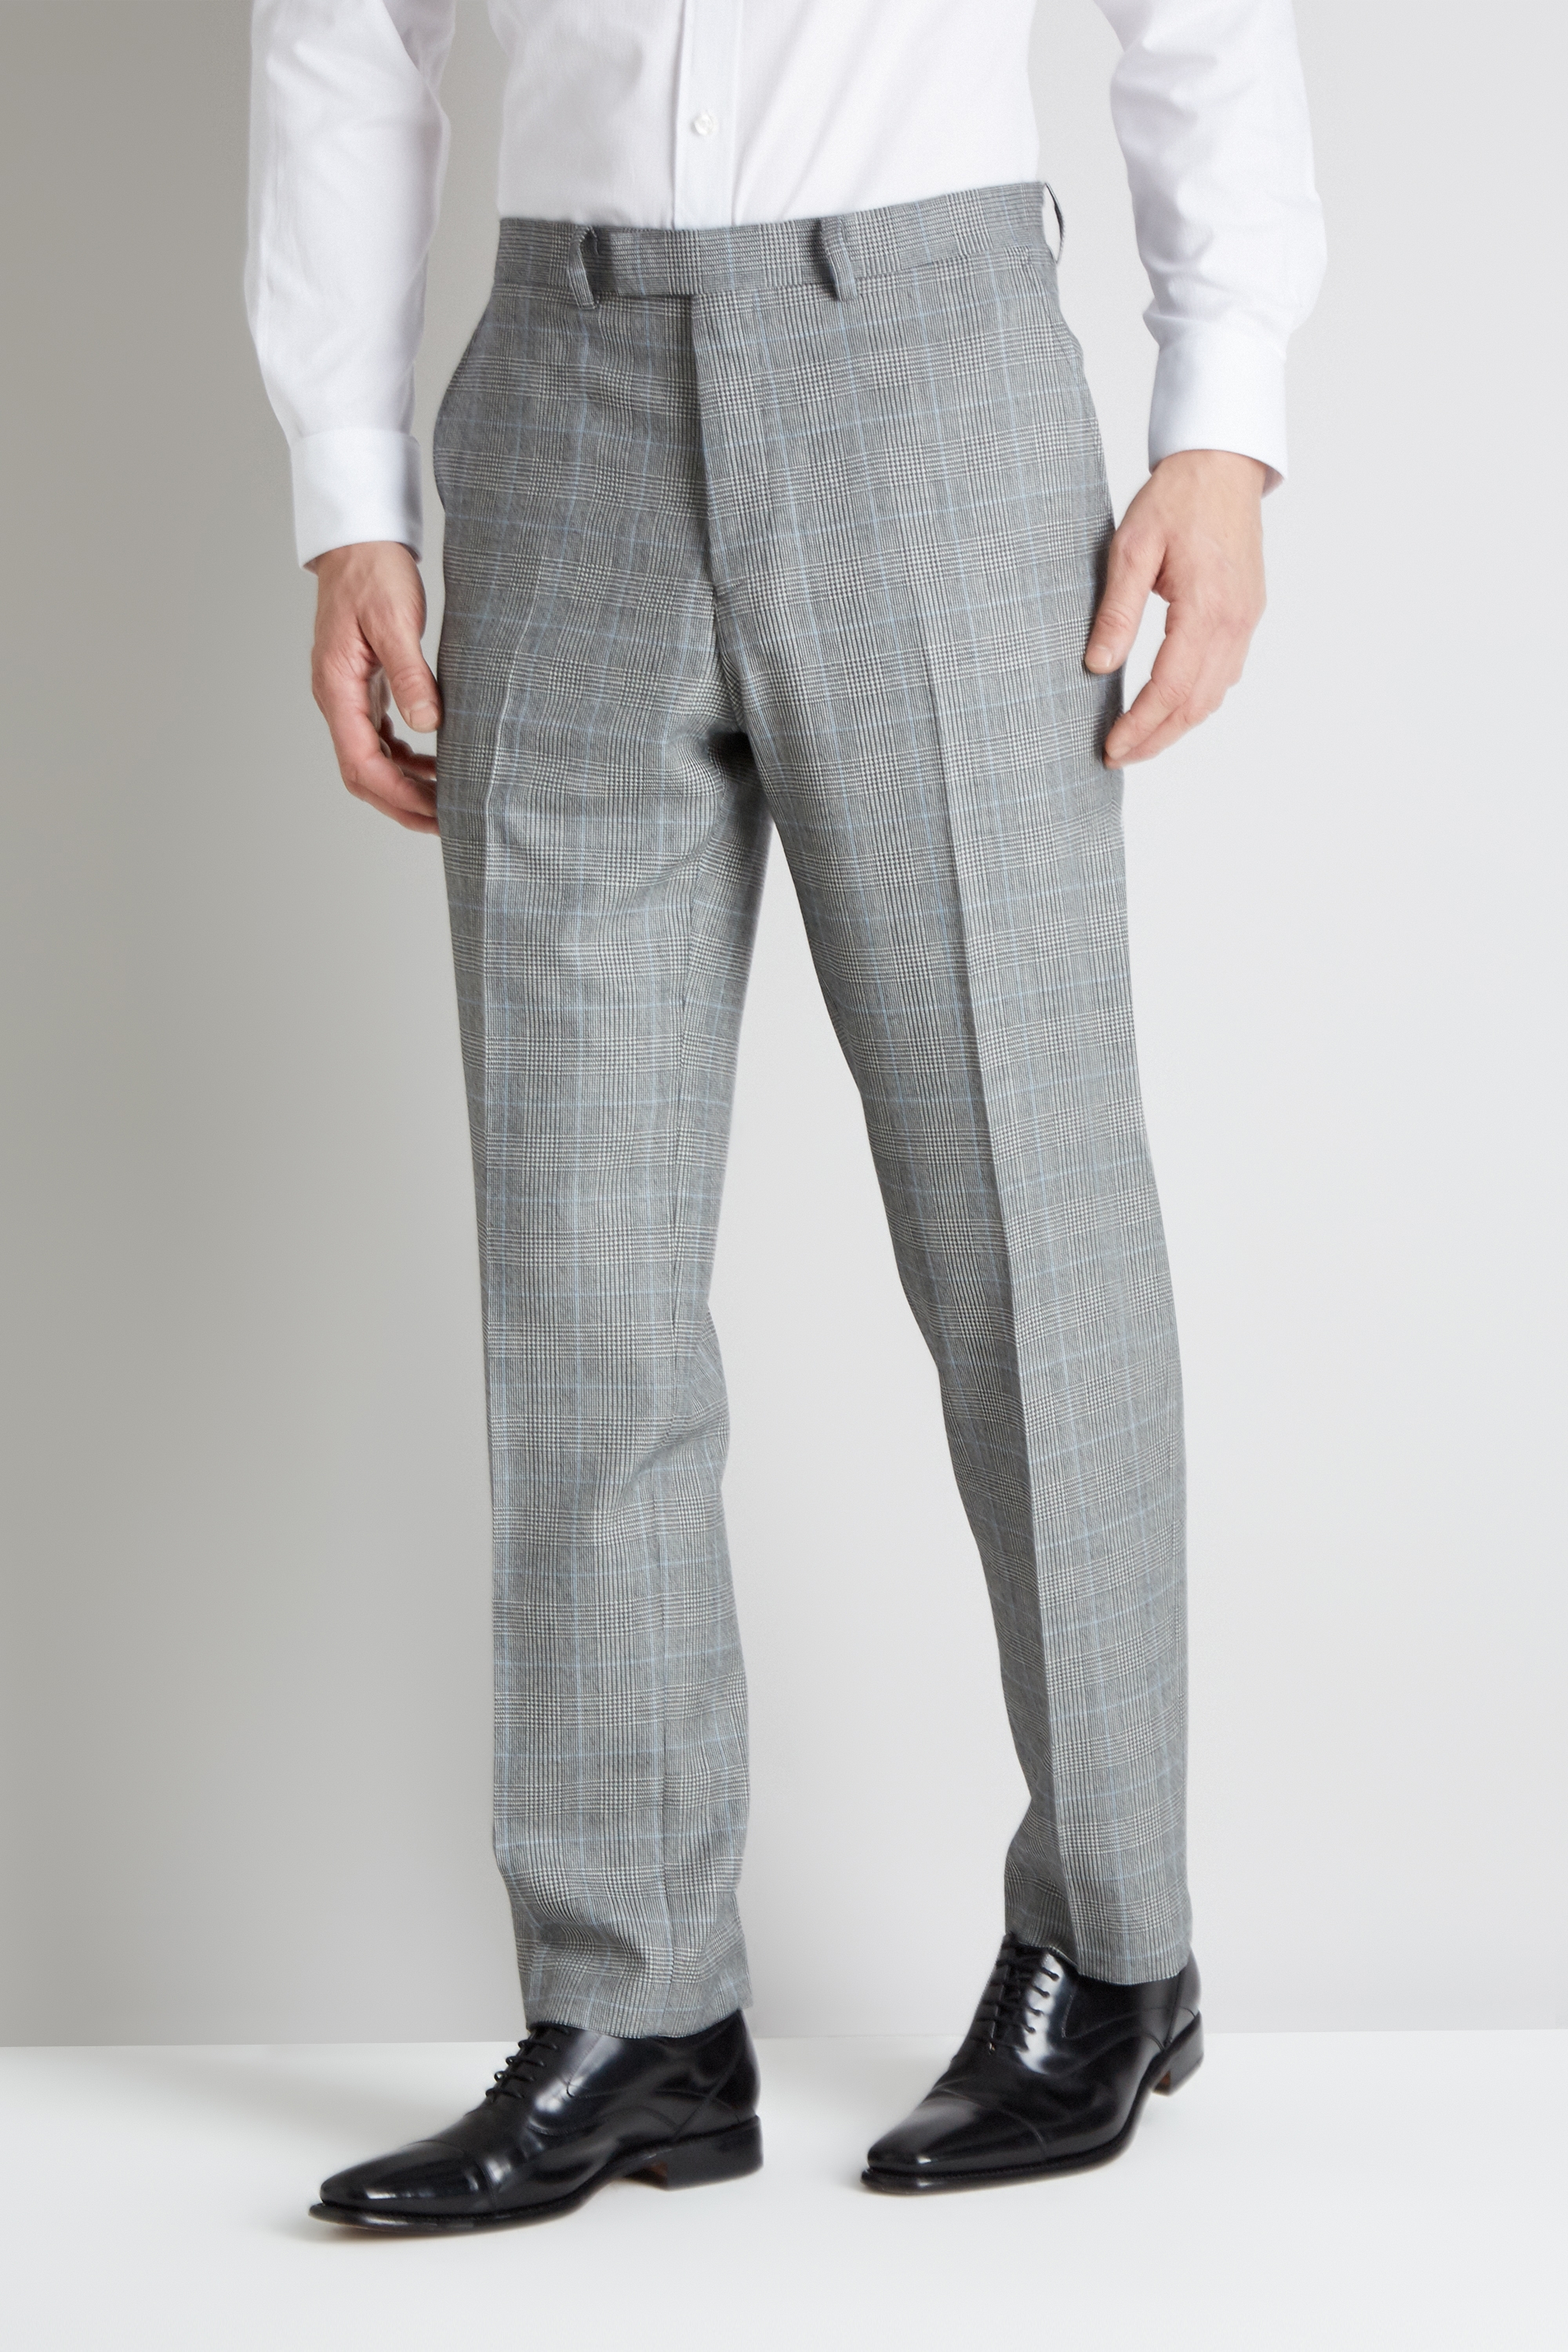 checkered black and white trousers